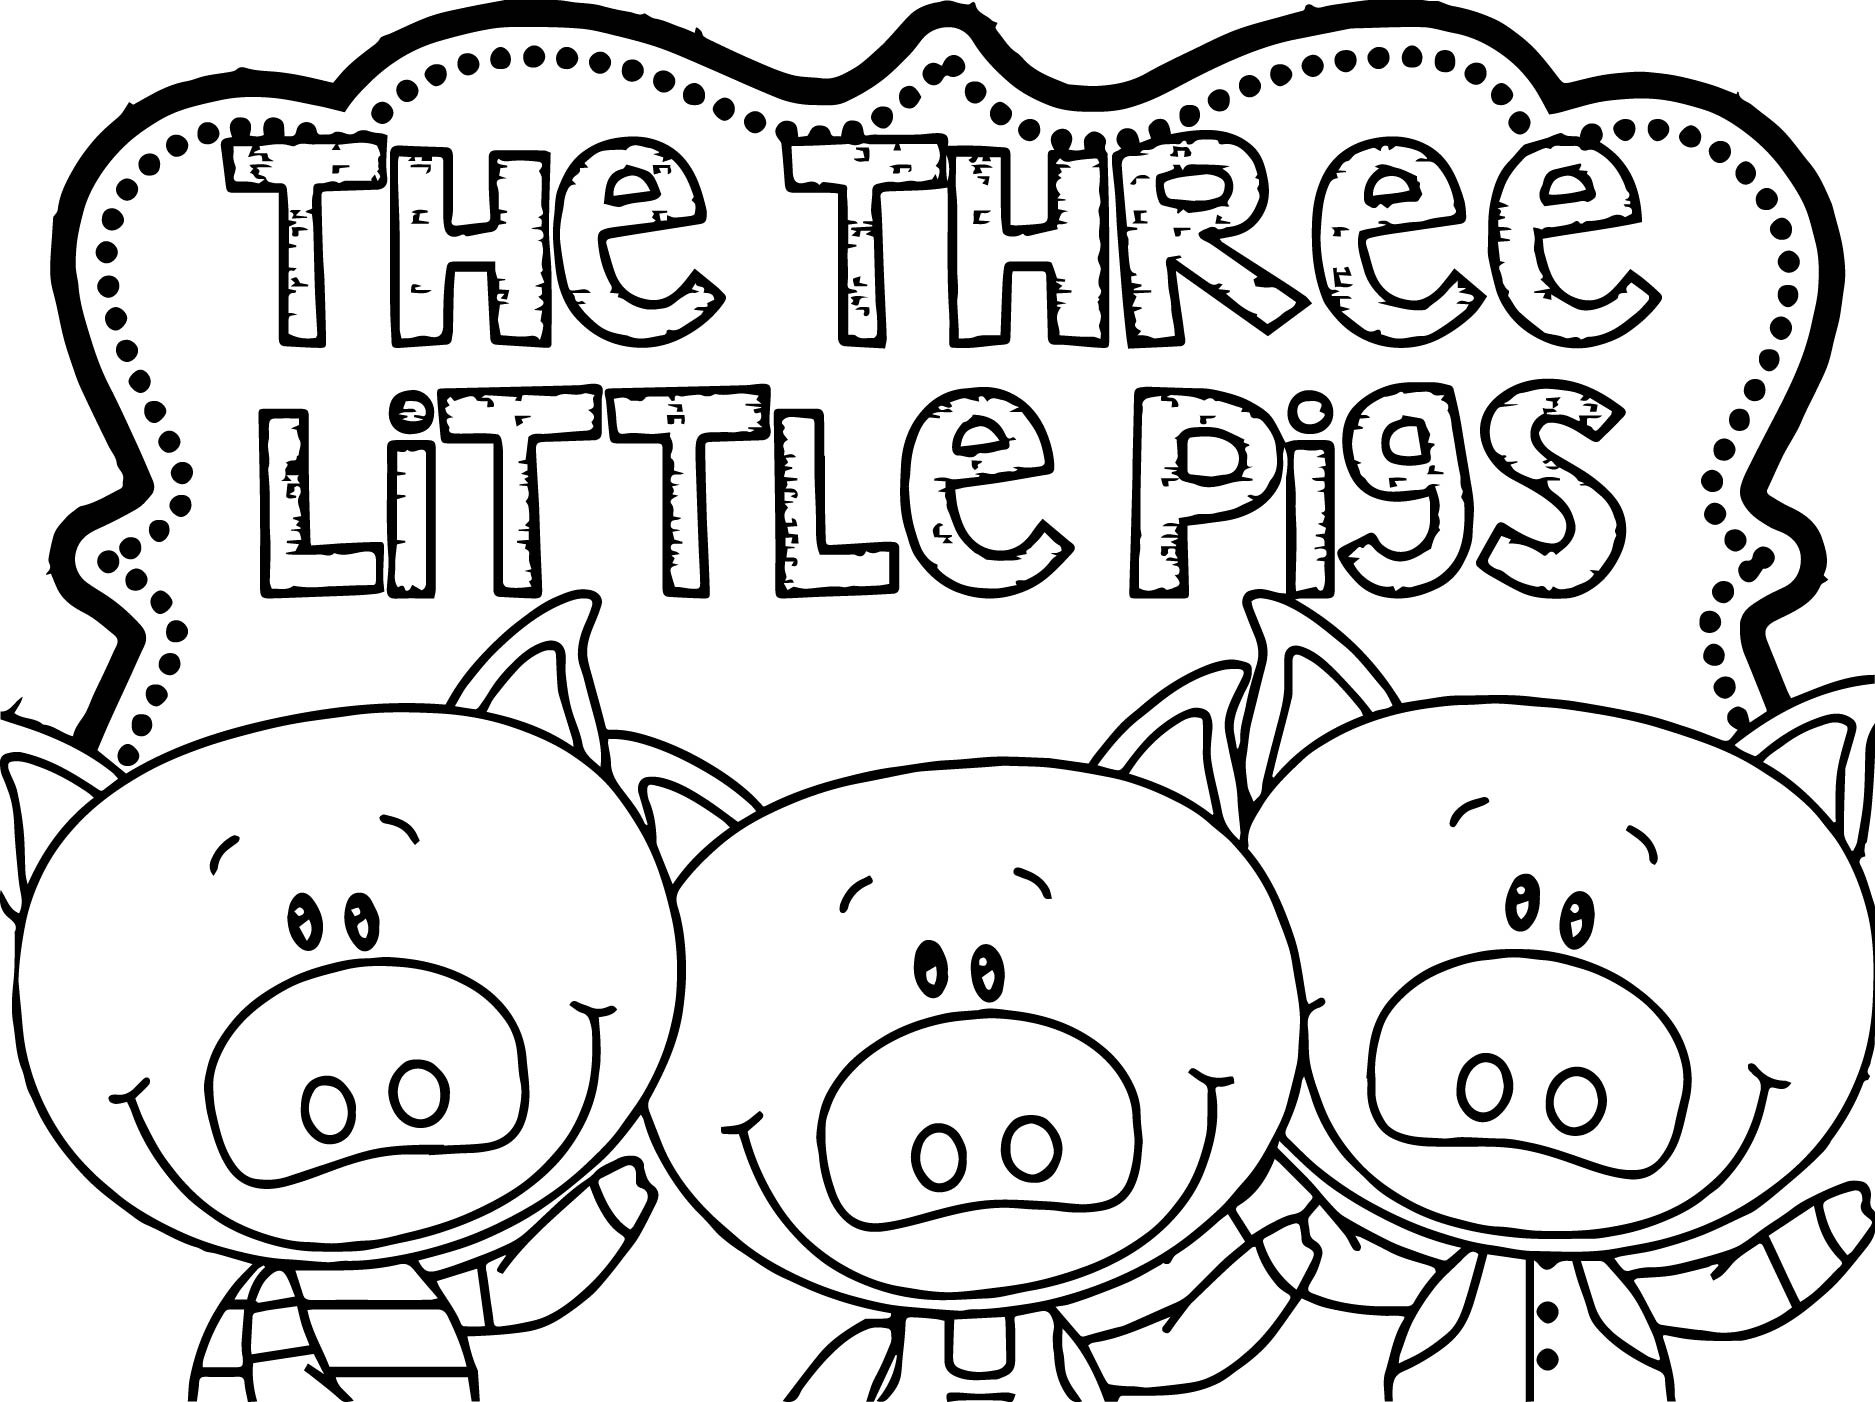 Preschool Coloring Sheets For The 3 Little Pigs Wolf Mask
 Three Little Pigs Coloring Page